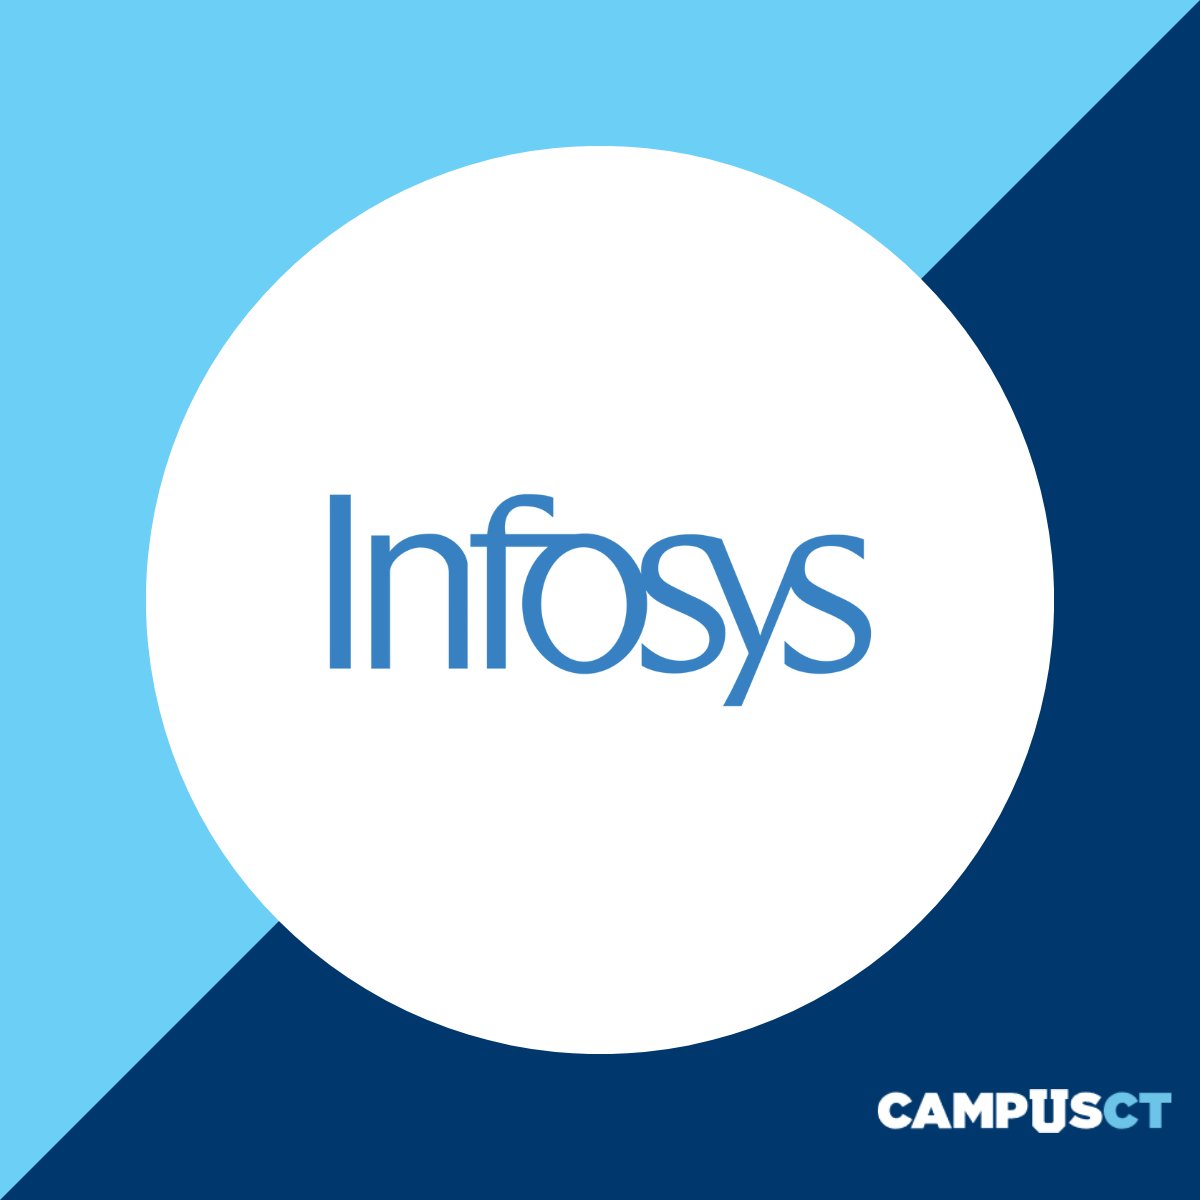 This week's CampusCT employer spotlight is @Infosys! 
Click this link to learn more about what it's like to work at Infosys:explore.uppercampus.com/explore/entiti…

#connecticut #ct #college #highereducation #highered #career  #careerpath #graduates #ctvibe
#employerspotlight